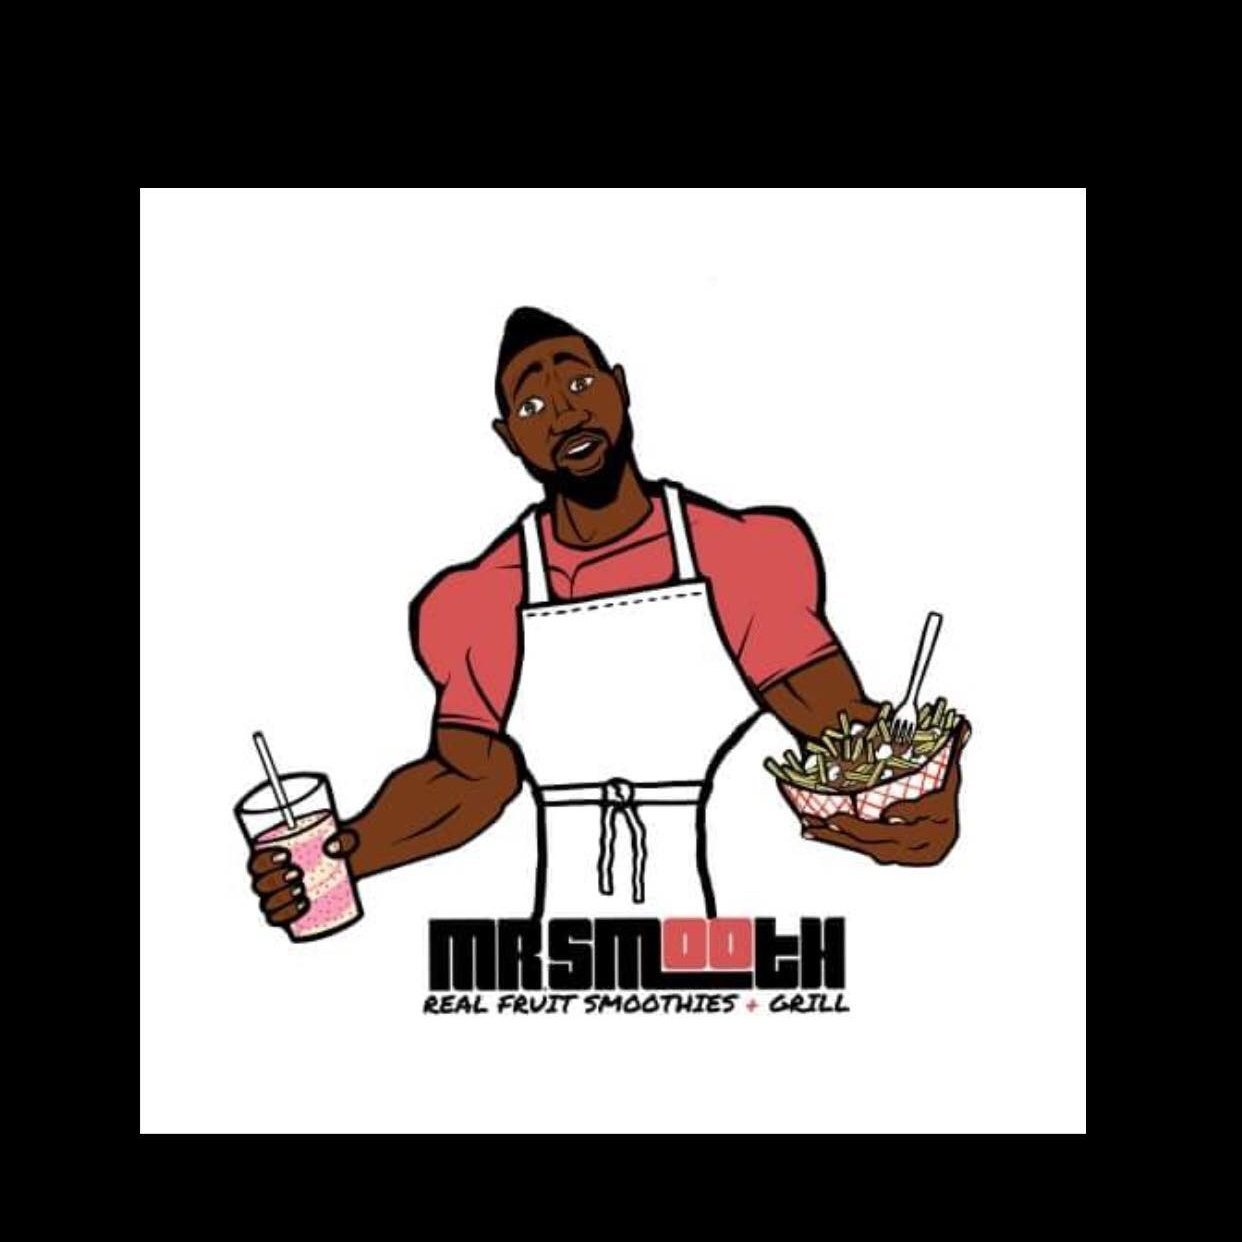 Mr Smooth have been serving up real fruit smoothies for more then 12 yrs . We just added other foods like burgers, fries, hot dogs, poutine,fish/chips & wings